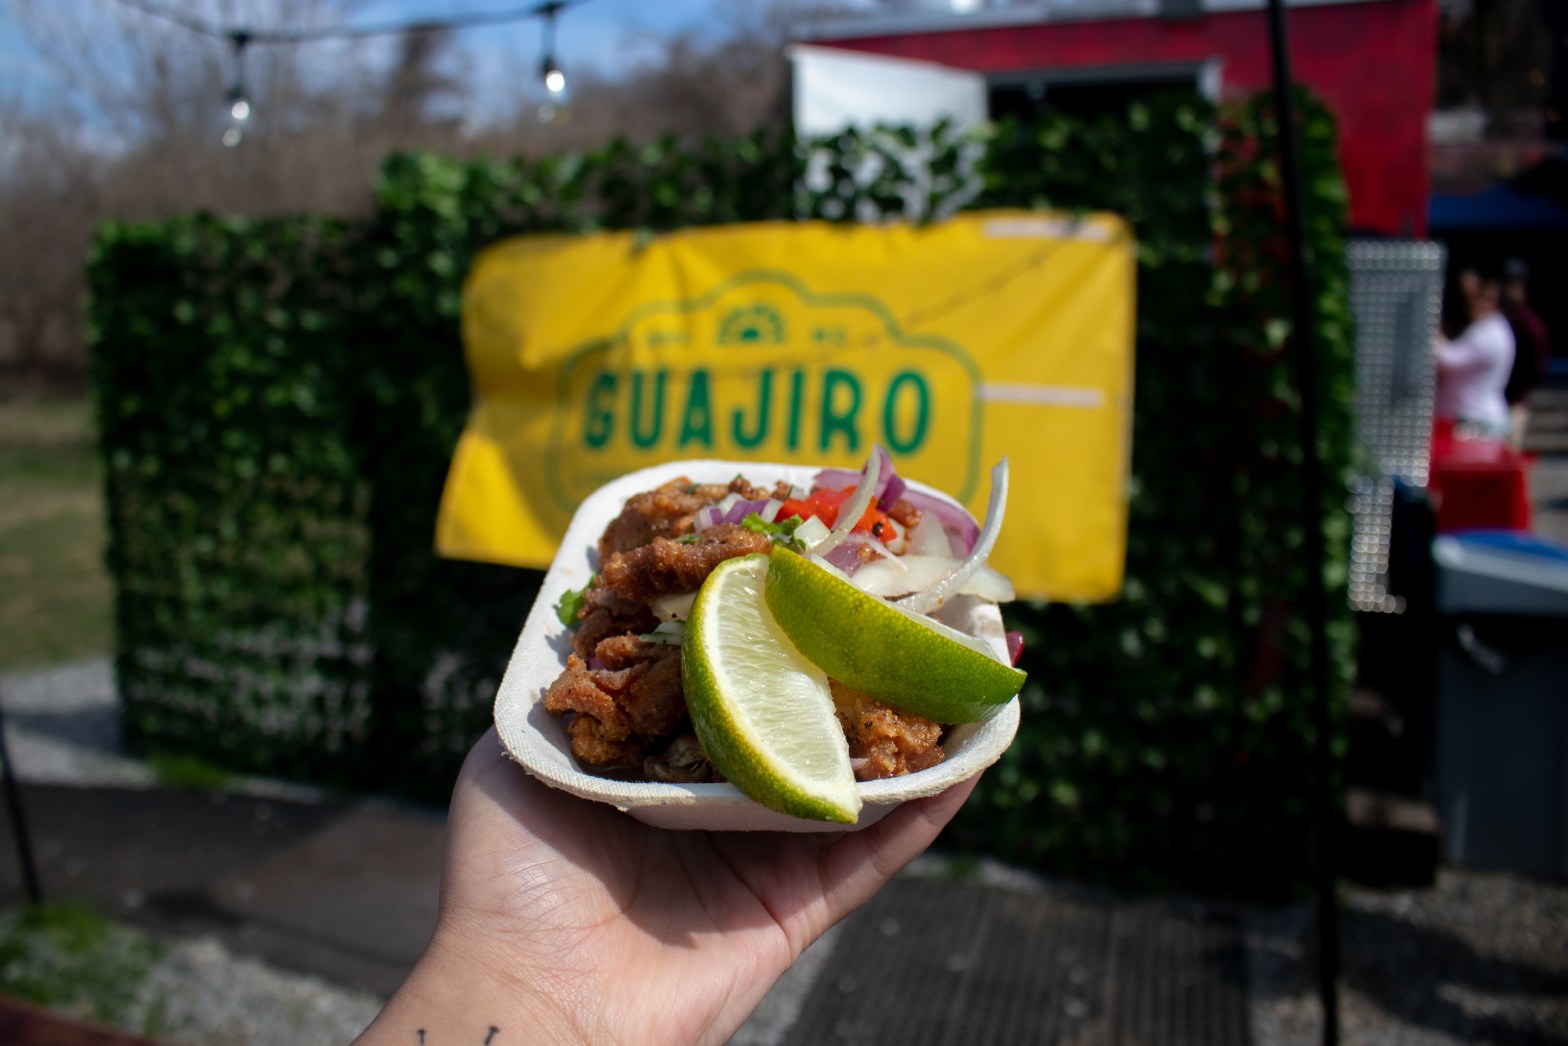 a hand is holding a white rectangular dish with some raw onion, pork, and two lime wedges. In the abckground is a fake green wall with a yellow banner on it that says Guajiro on it.